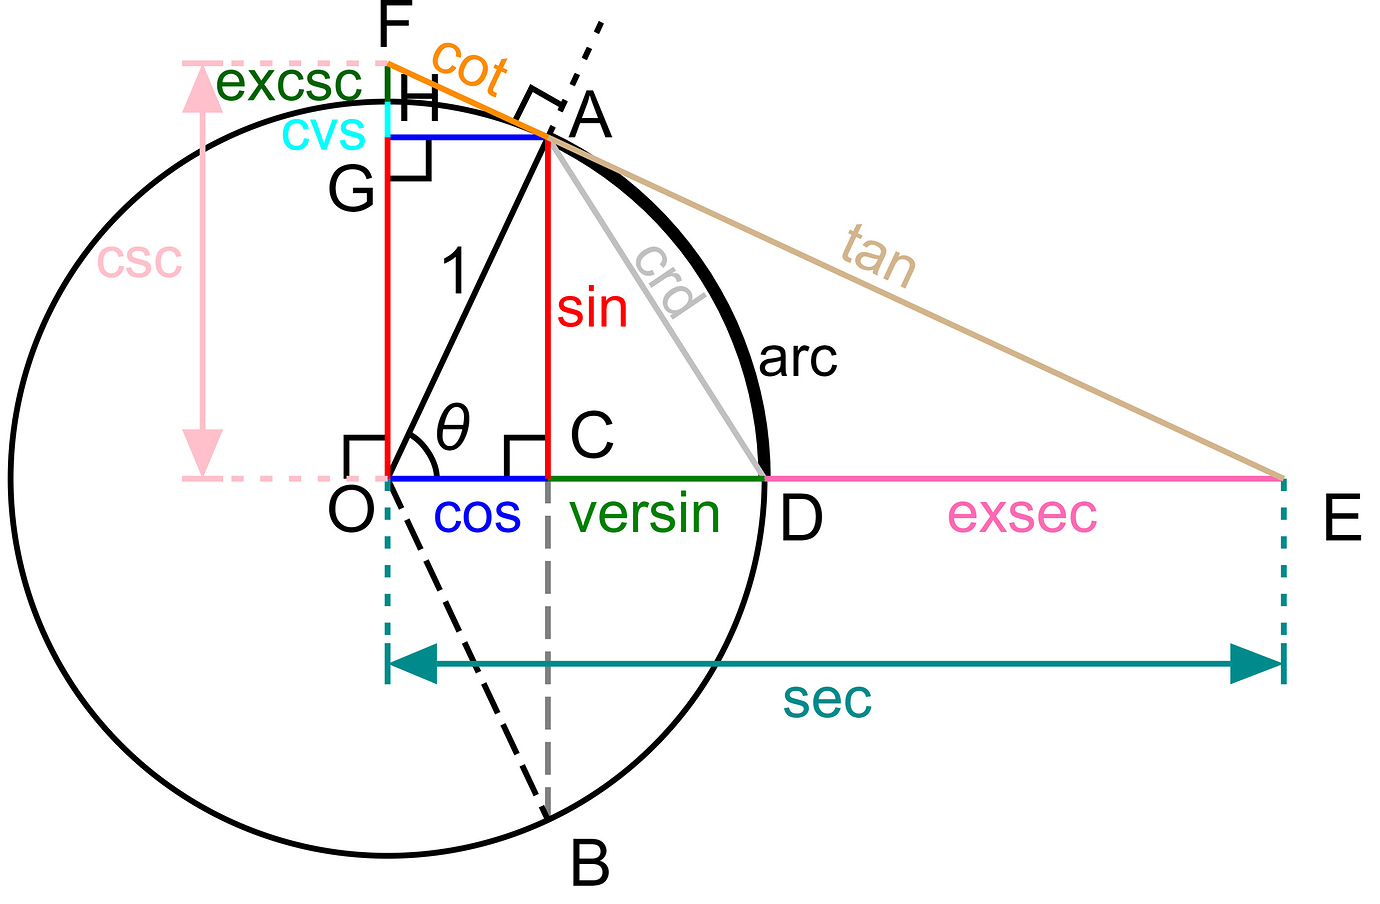 origin-of-trig-terms-tangent-and-secant-history-simpliengineering